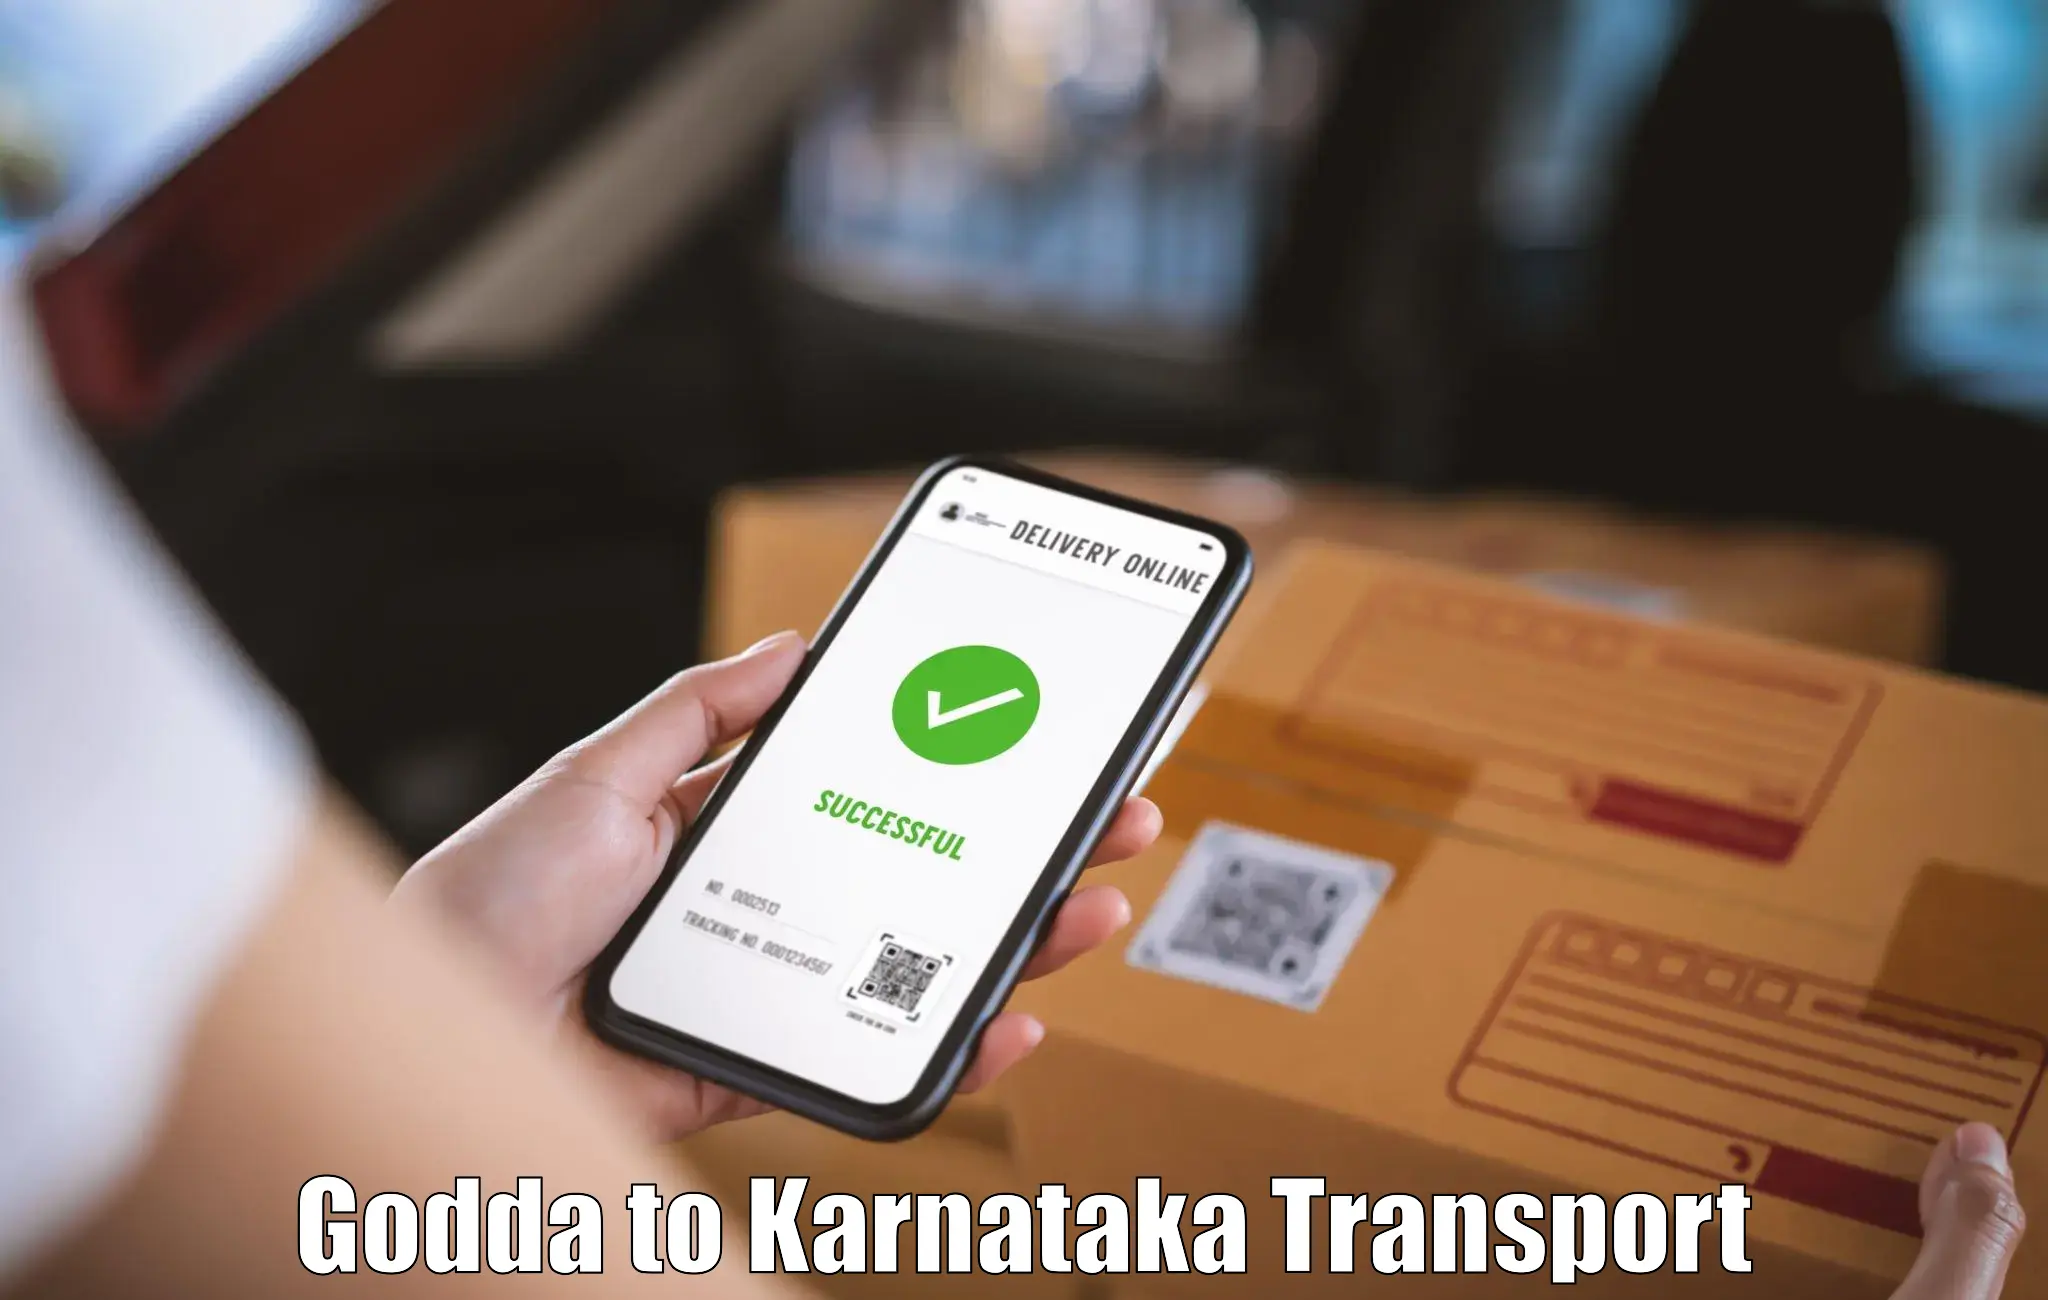 Part load transport service in India Godda to Bantwal